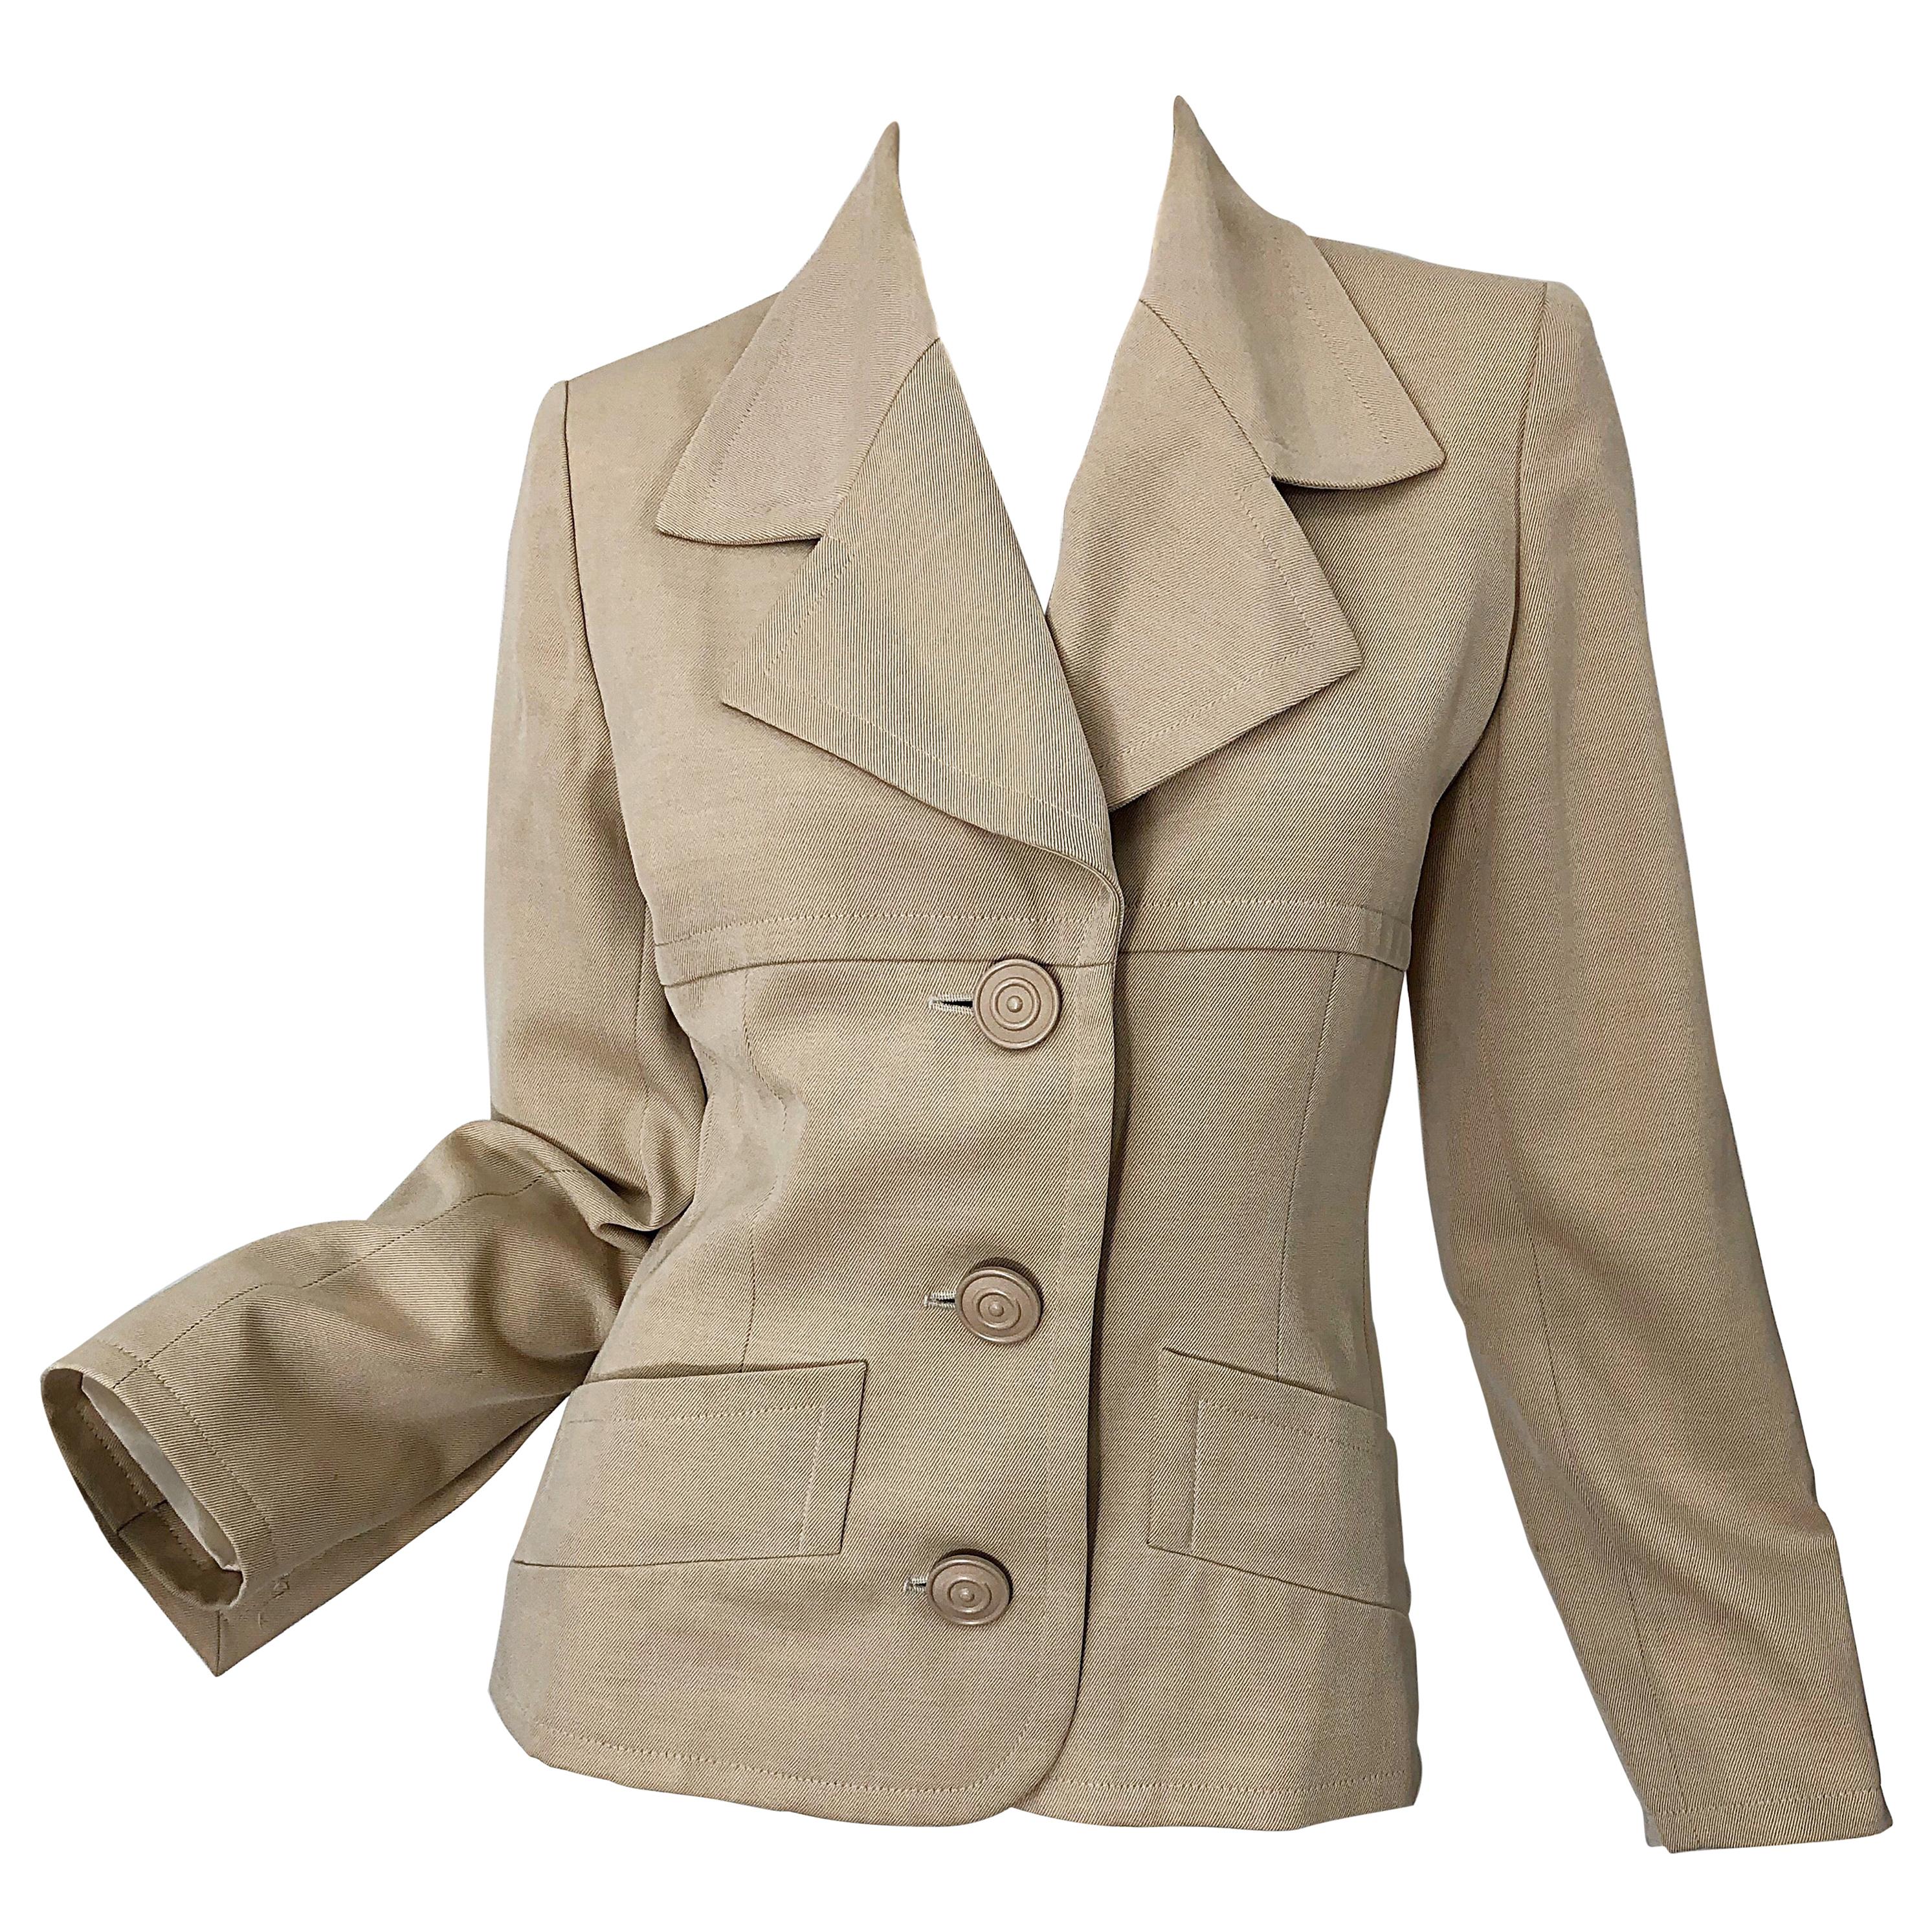 Vintage Givenchy Couture by Alexander McQueen 1990s Khaki Tan 90s Jacket Blazer